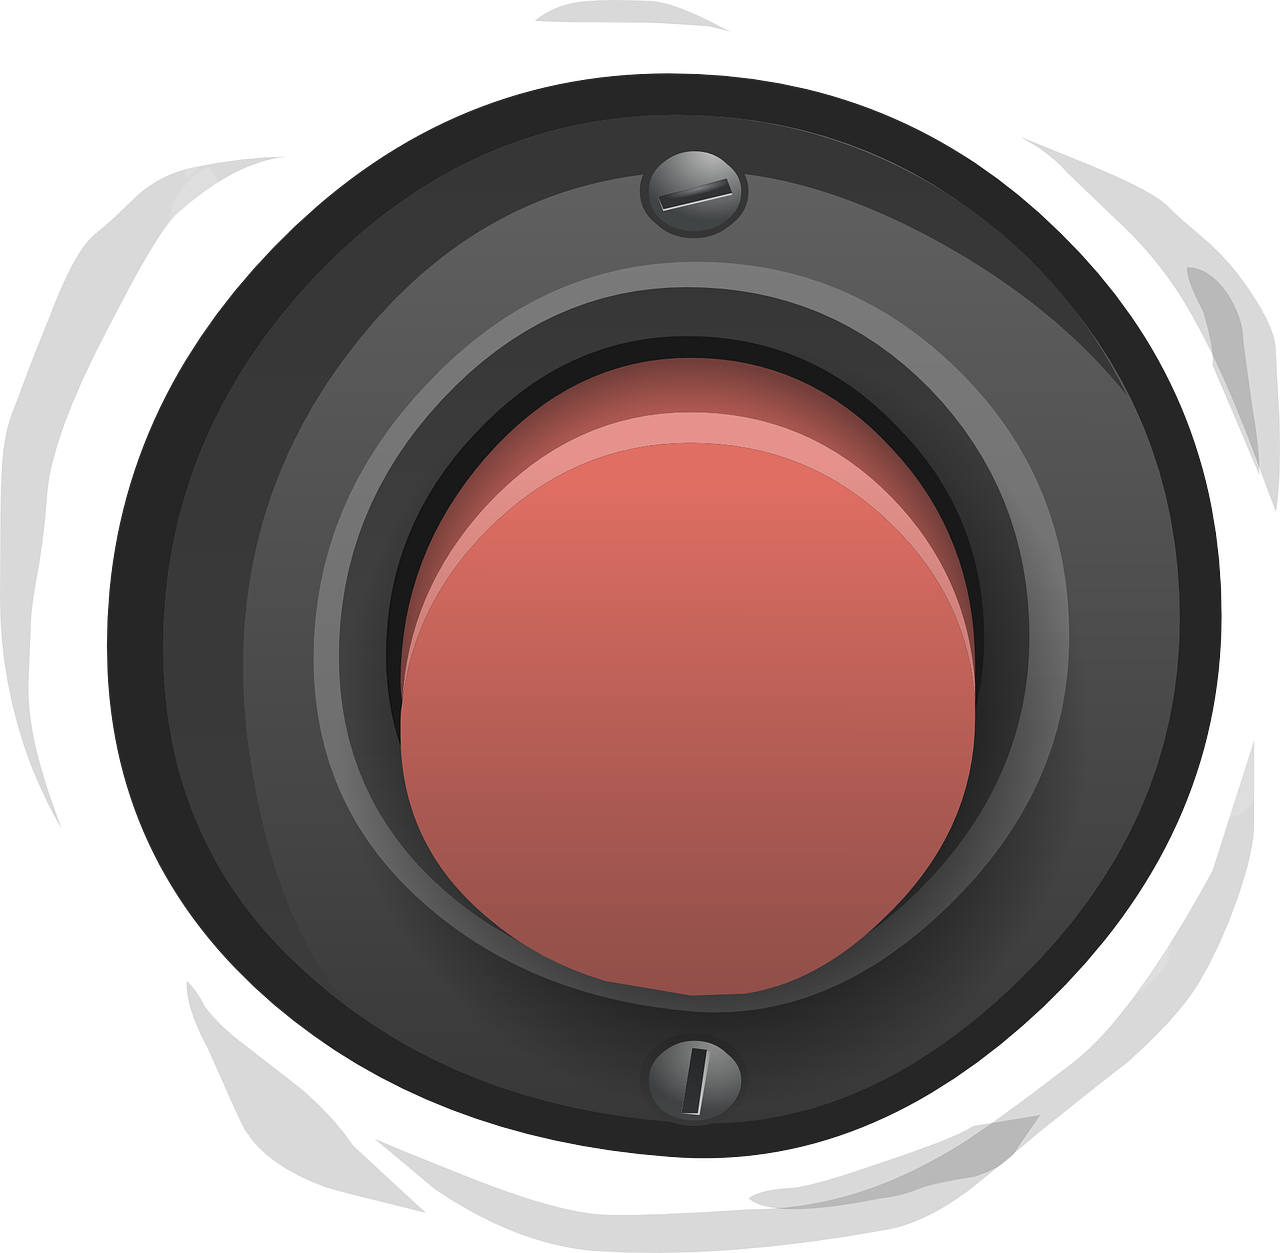 a close up of a red button on a black background, a digital rendering, by John Button, wikihow illustration, cone, [ horror game ], portal 3